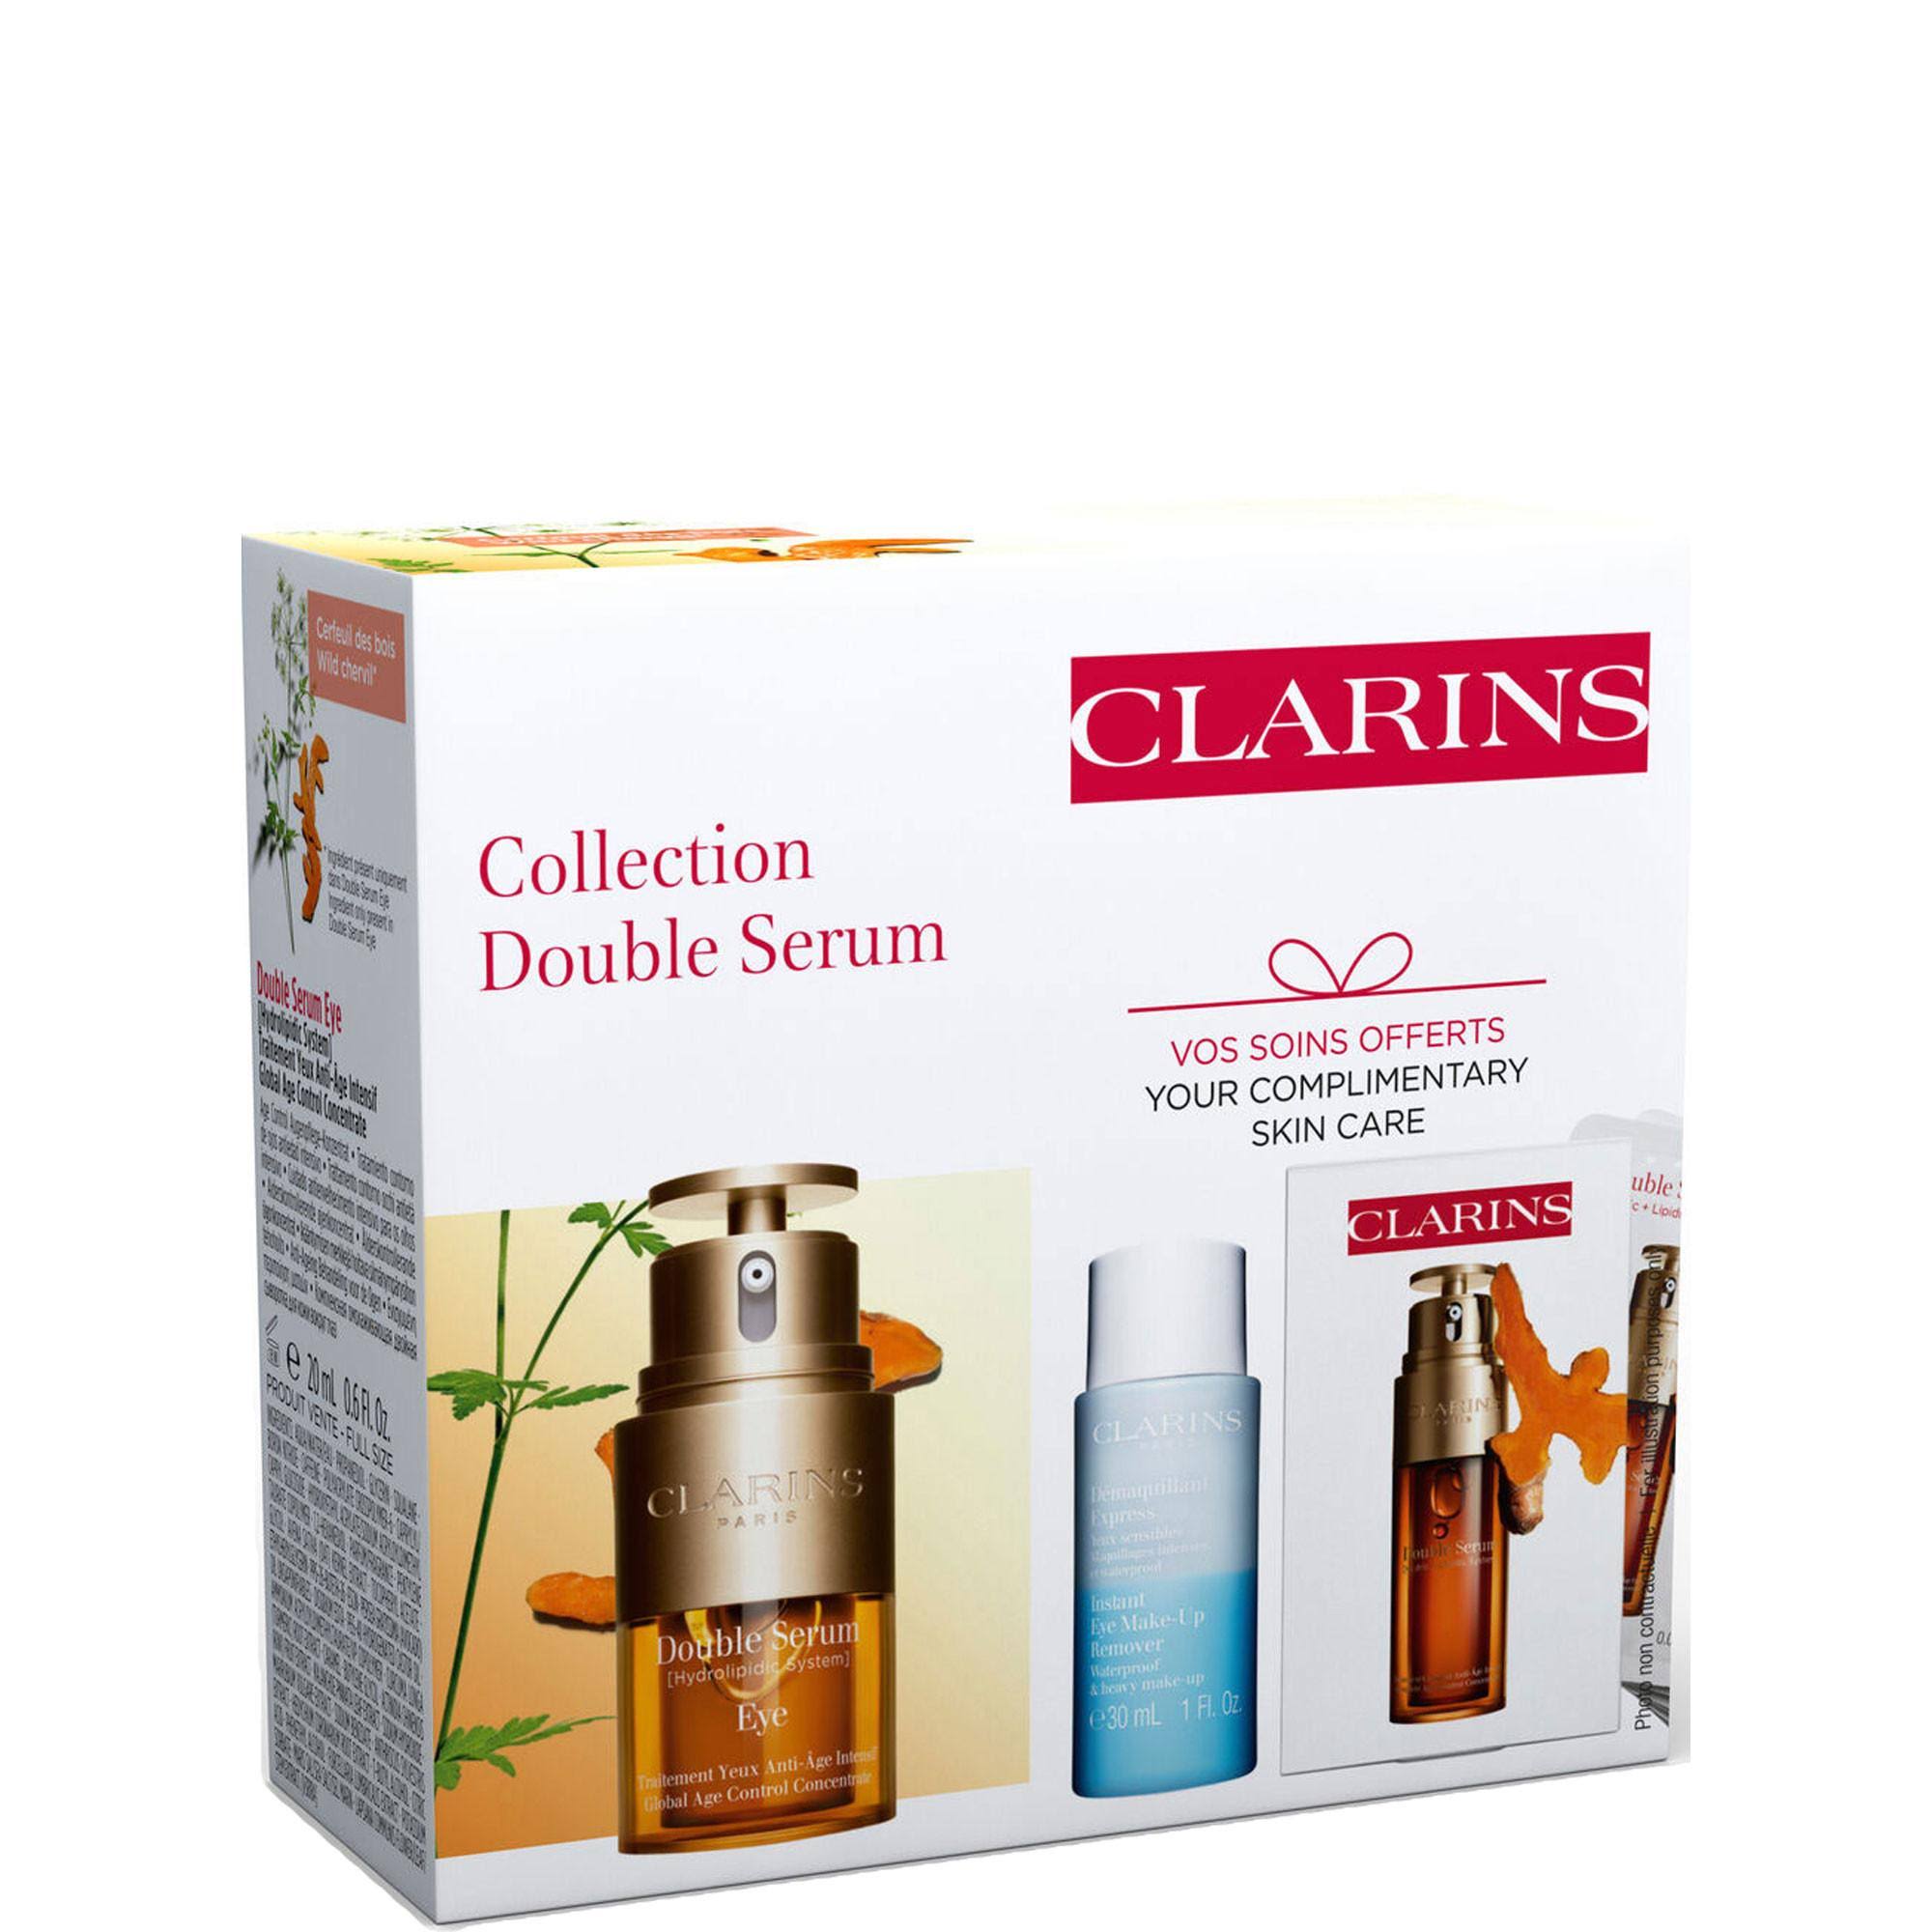 Clarins Double Serum Eye Value Pack